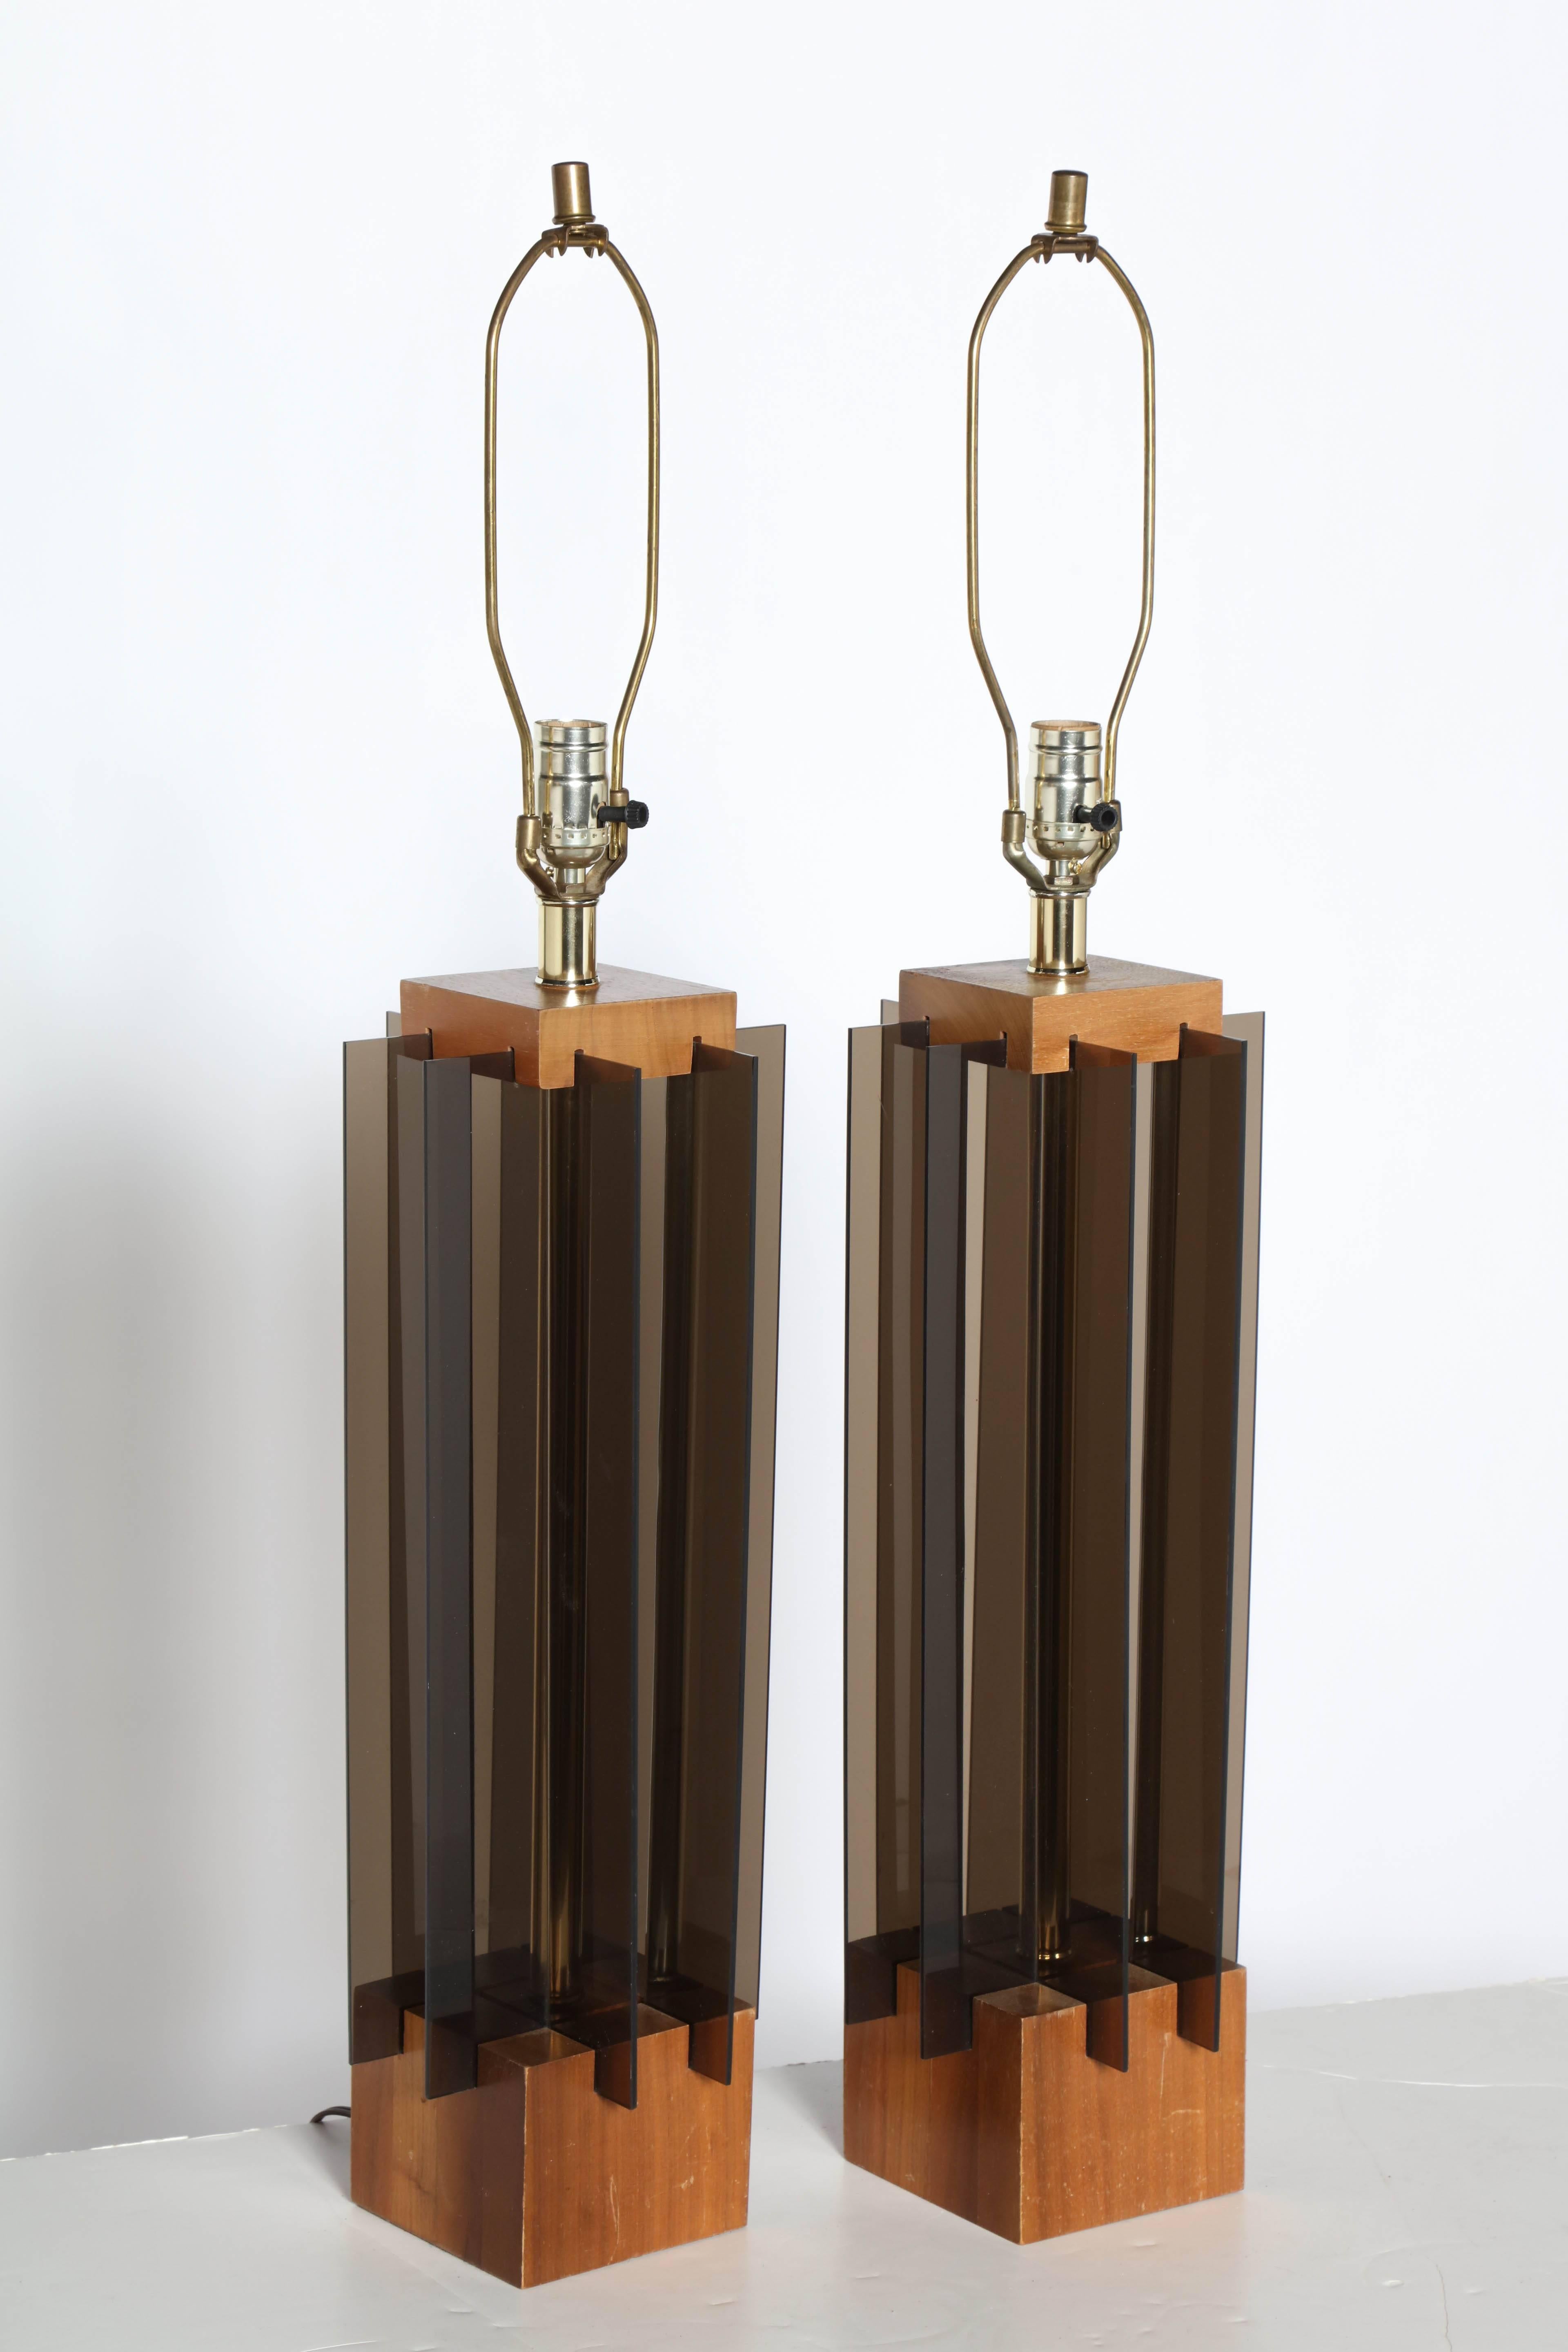 Substantial Pair of International Style Laurel Lamp Co. attributed Walnut, Lucite & Brass Table Lamps, 1960s. Featuring a Walnut rectilinear form, open center, tubular Brass central column, and eight Gray translucent Acrylic panels per lamp on a (5